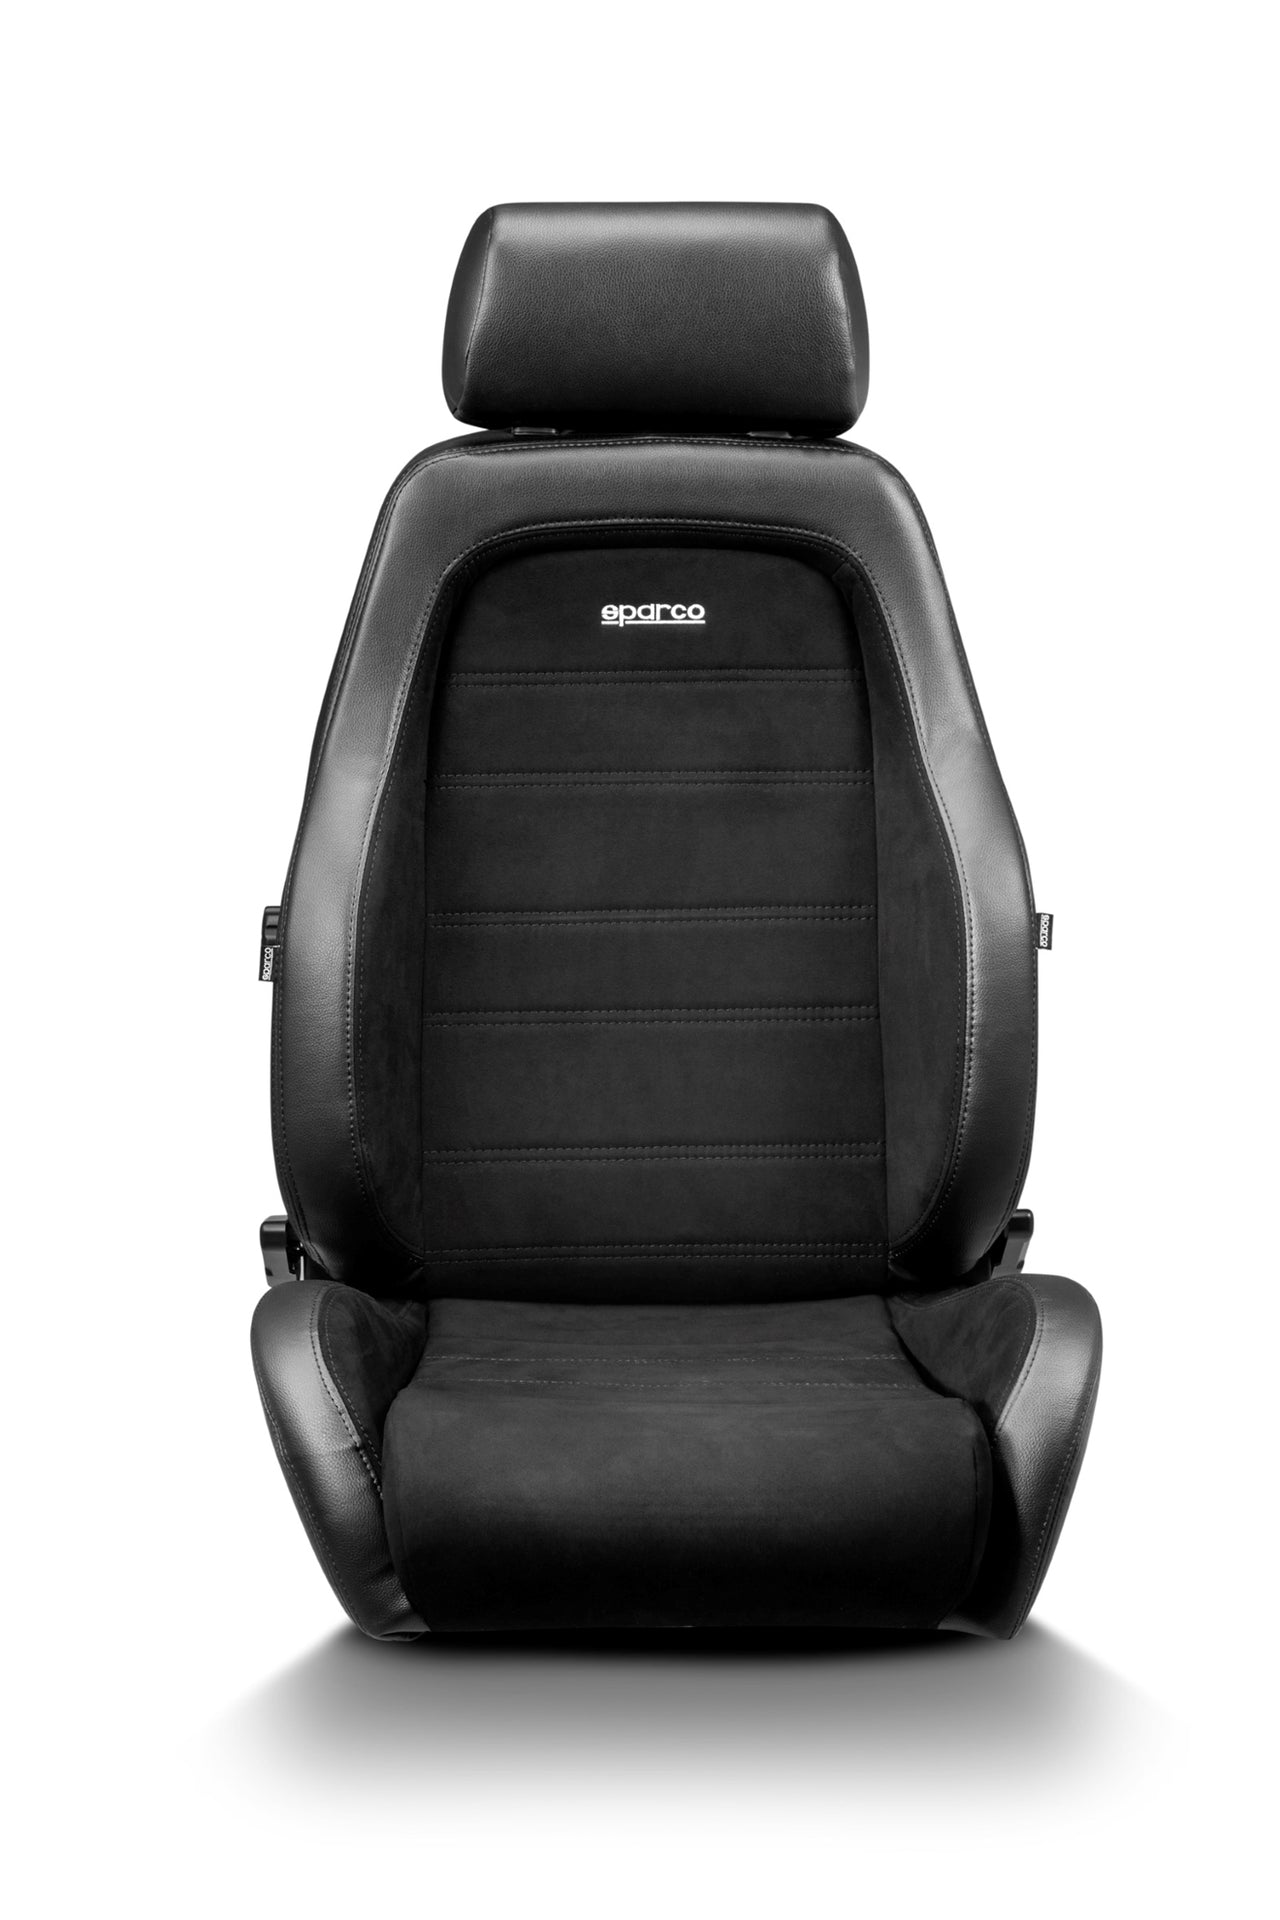 Sparco GT Seat Front Image with Sparco logo